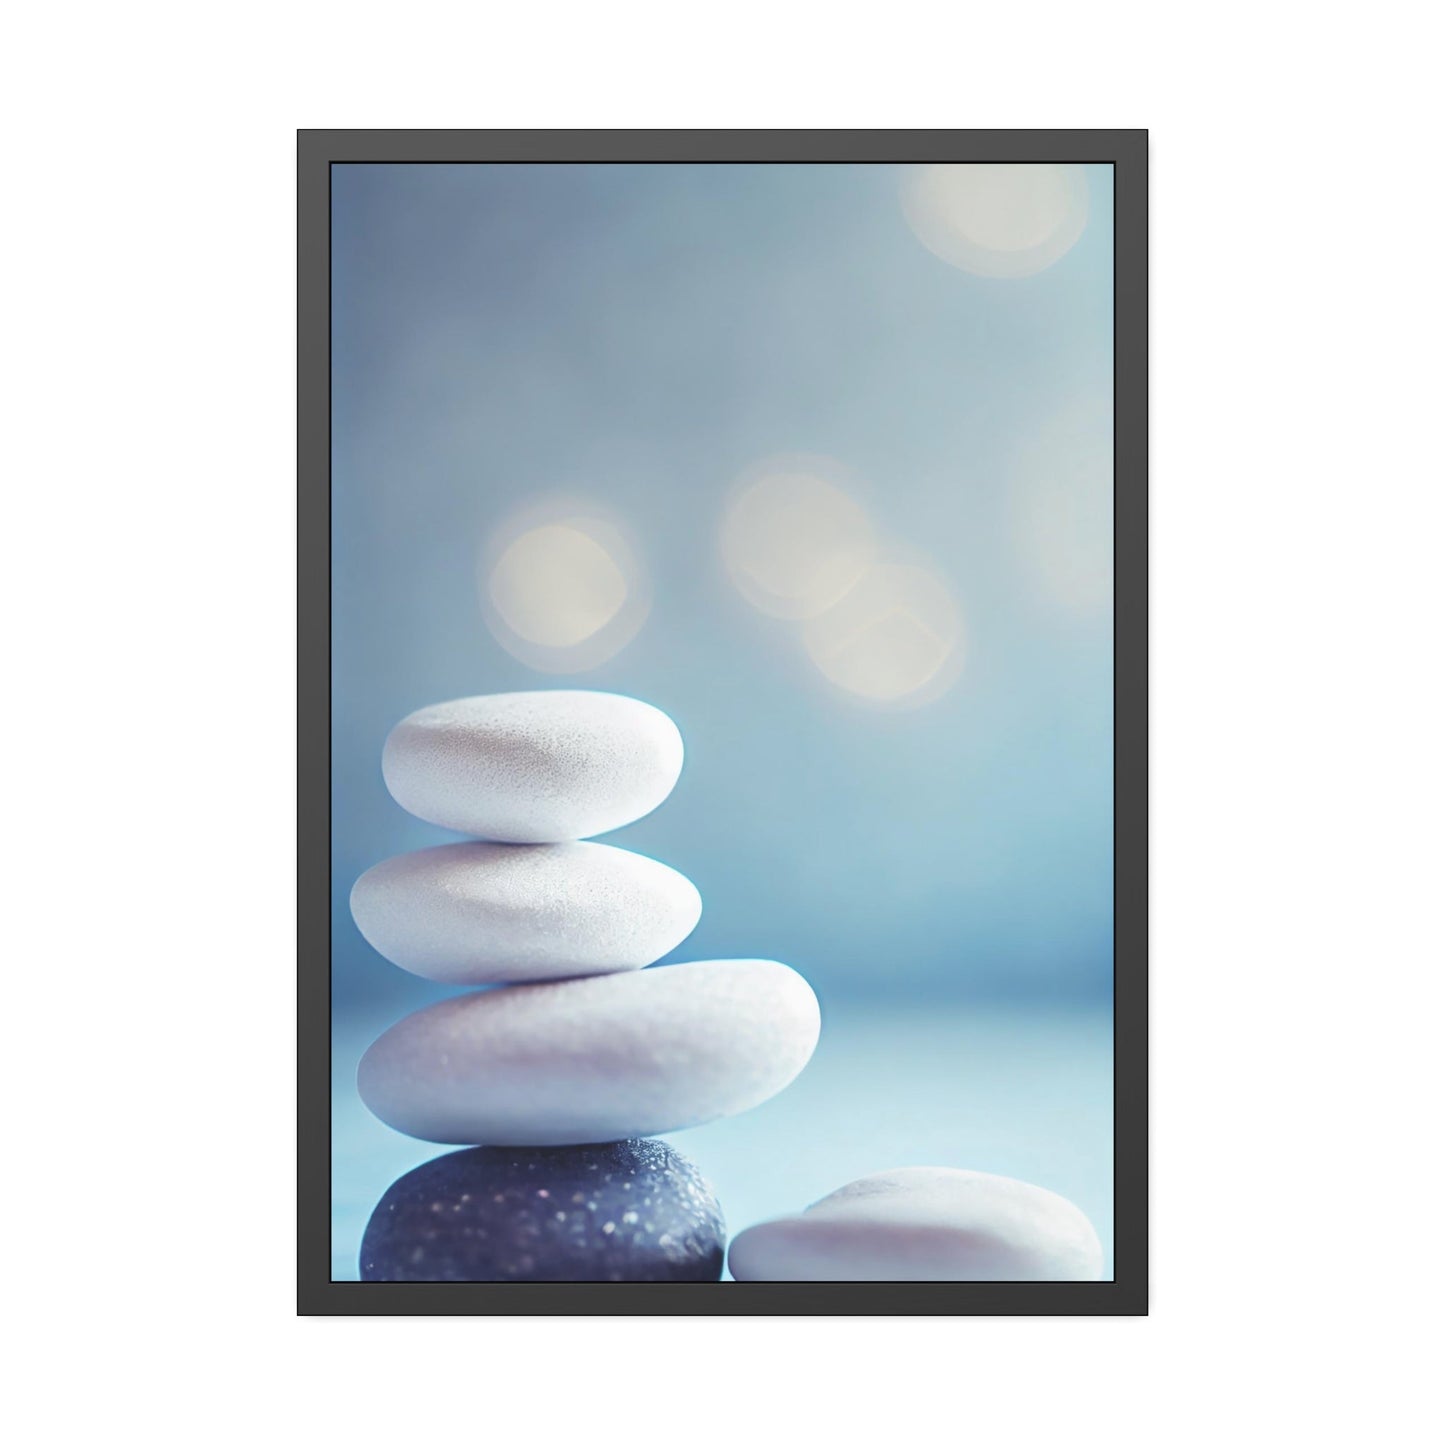 Let Your Worries Drift Away: Framed Poster to Promote Relaxation